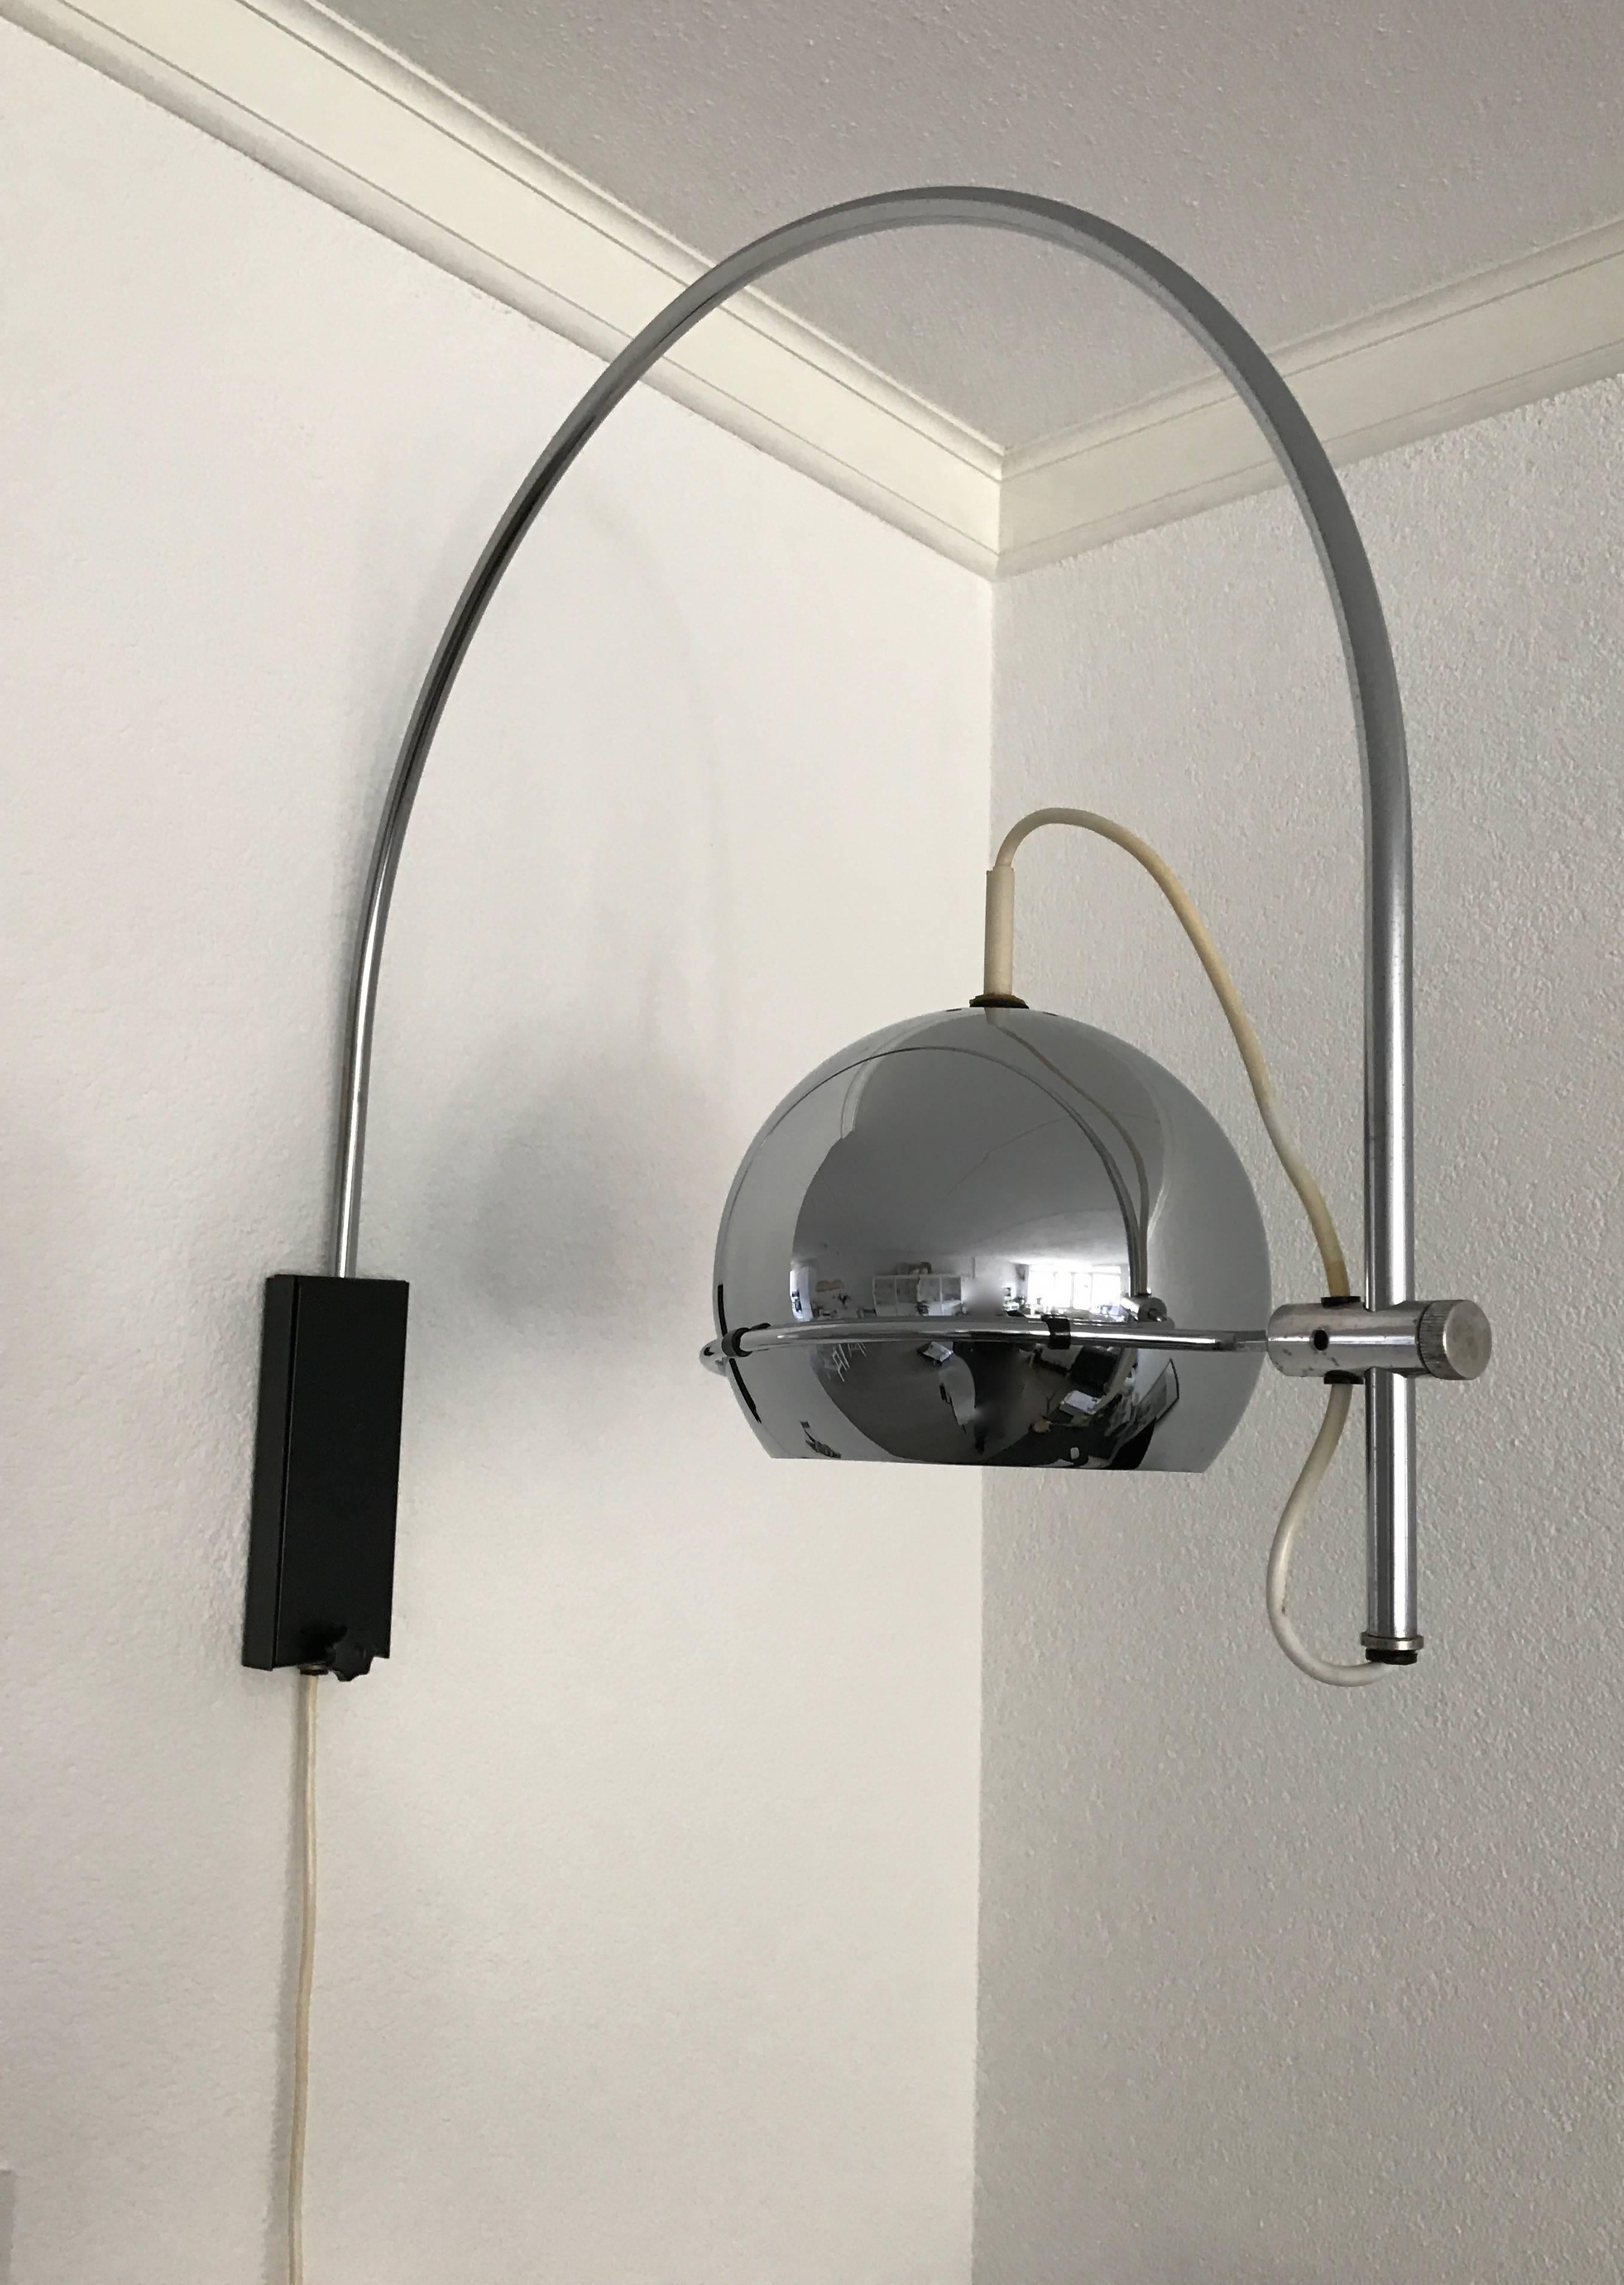 Beautifully designed and executed chromed wall lamp.

This easy to hang and practical to use wall lamp is in very good condition. It is similar to wall lamps that were made by Frank Ligtelijn for RAAK Amsterdam in the 1960s, but we are not sure if